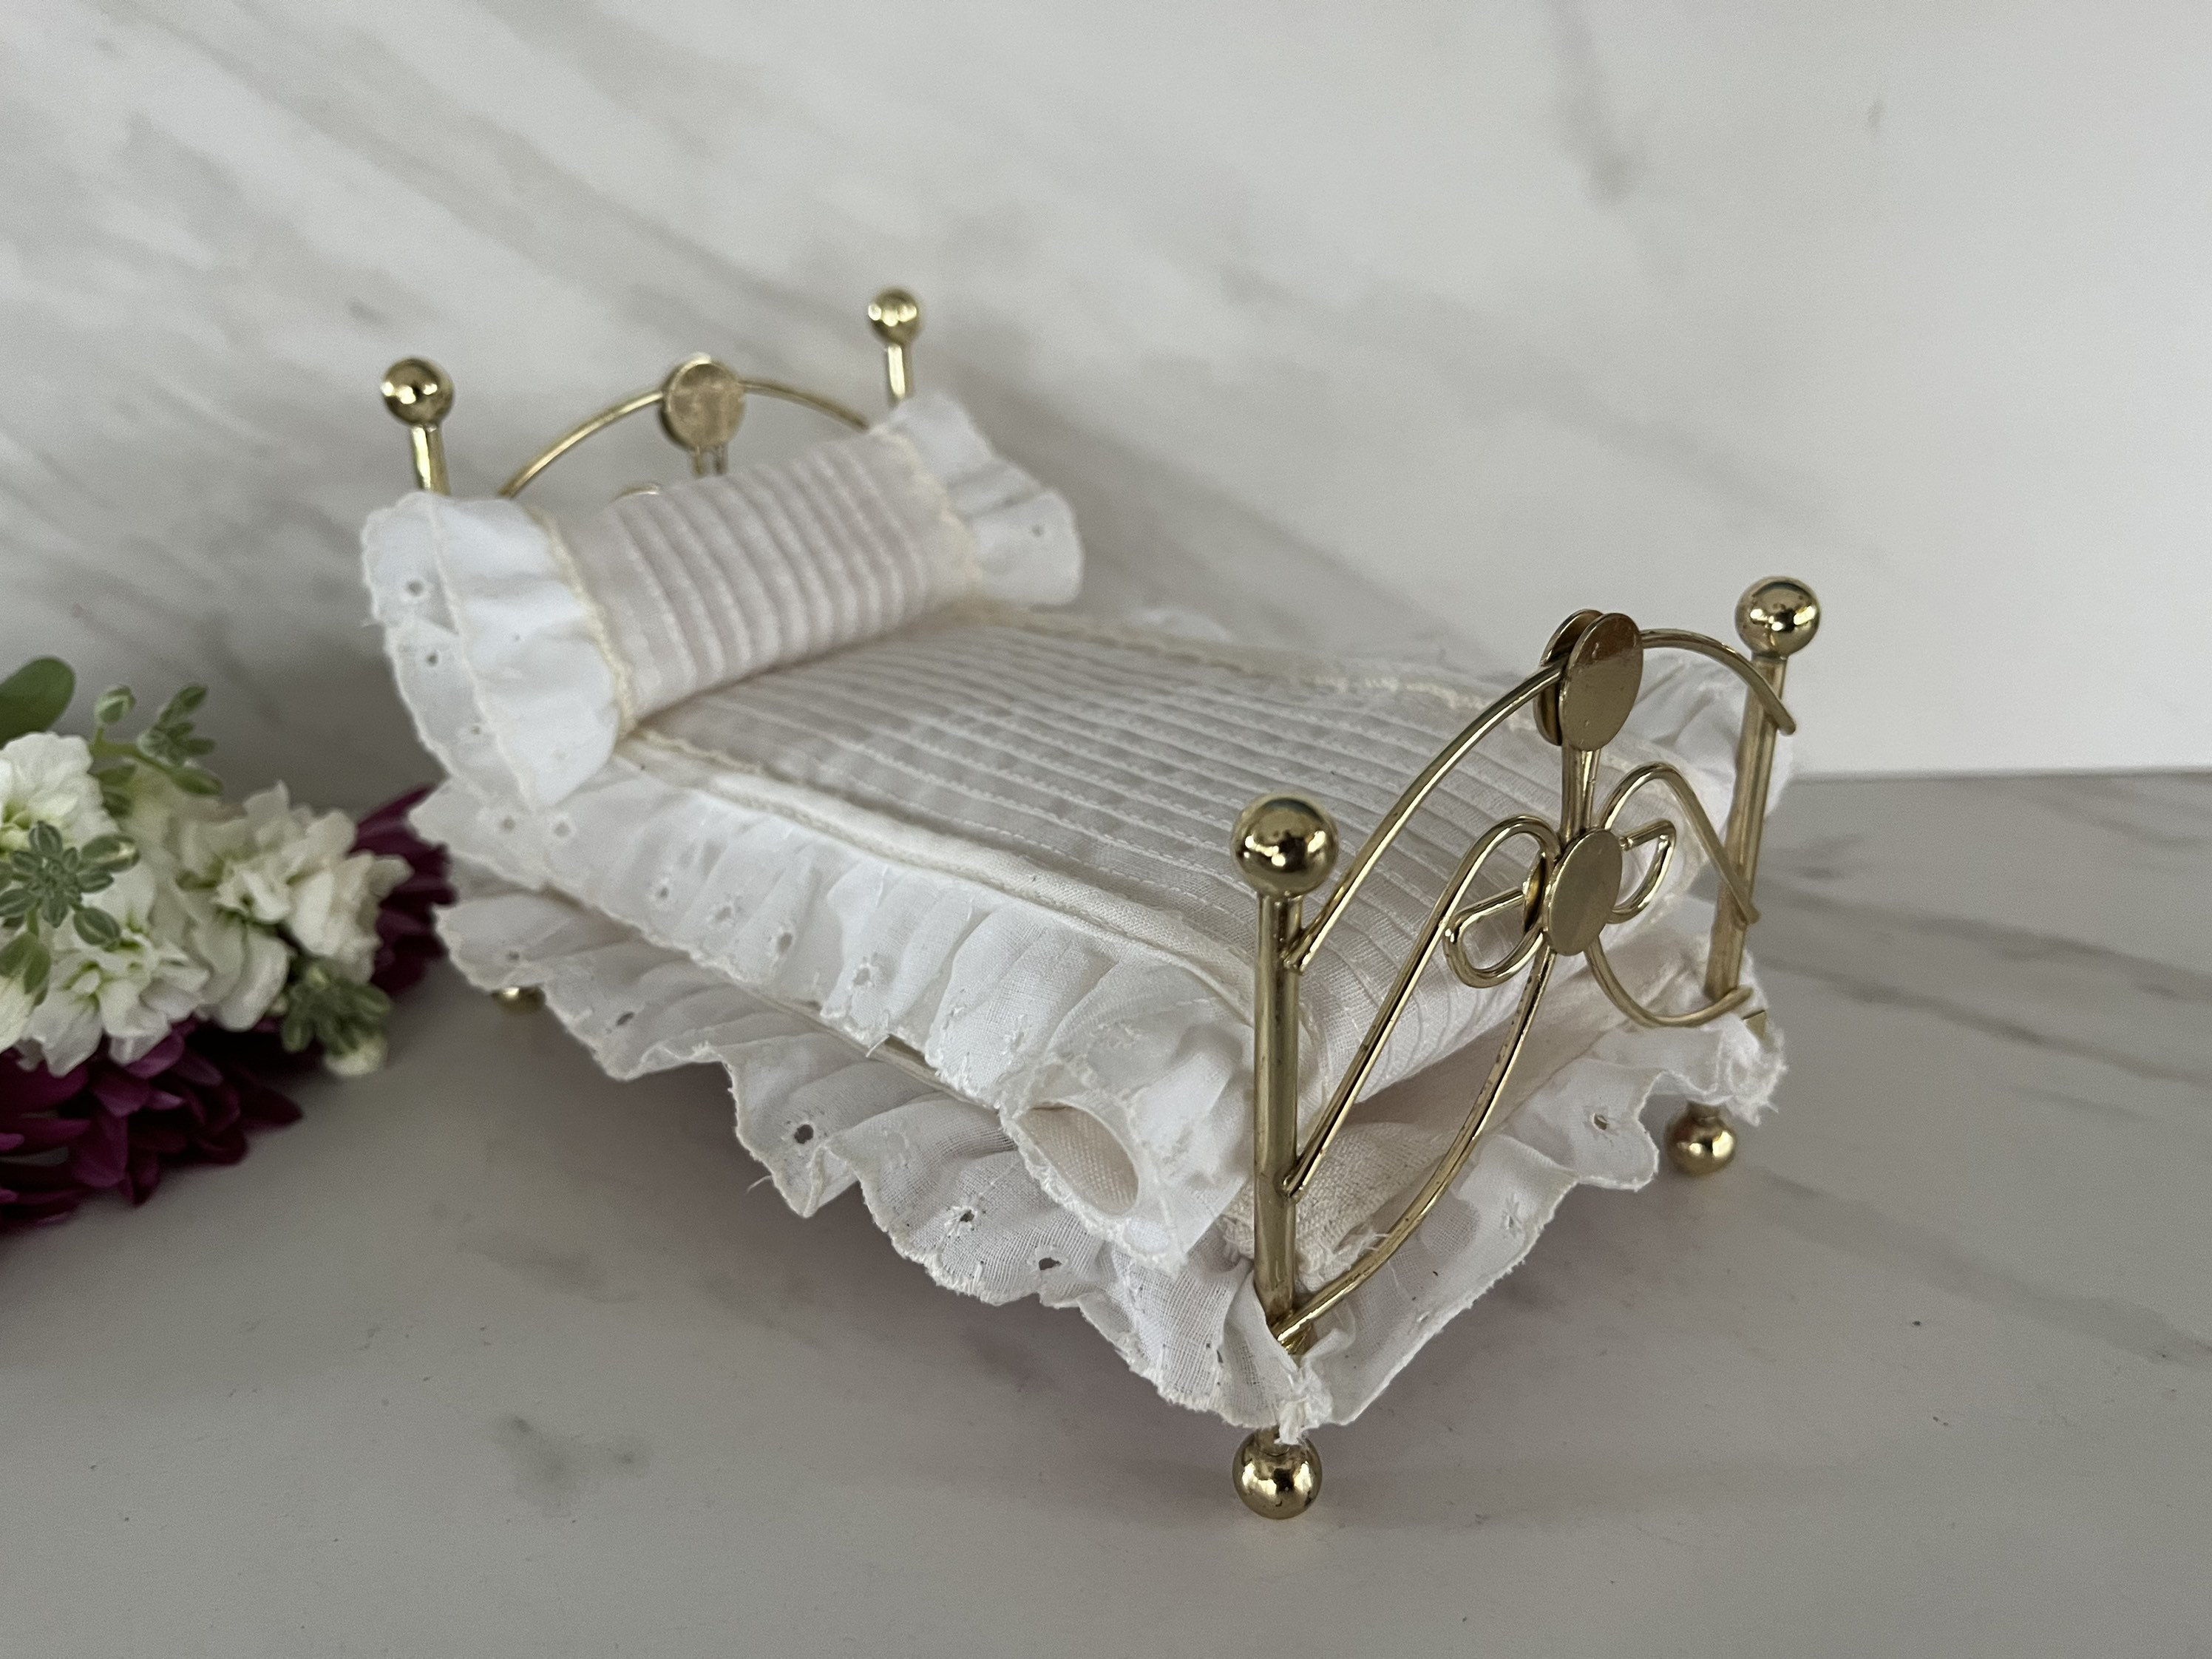 Miniature Faux Brass Bed for Doll House With Mattress, Bed Skirt